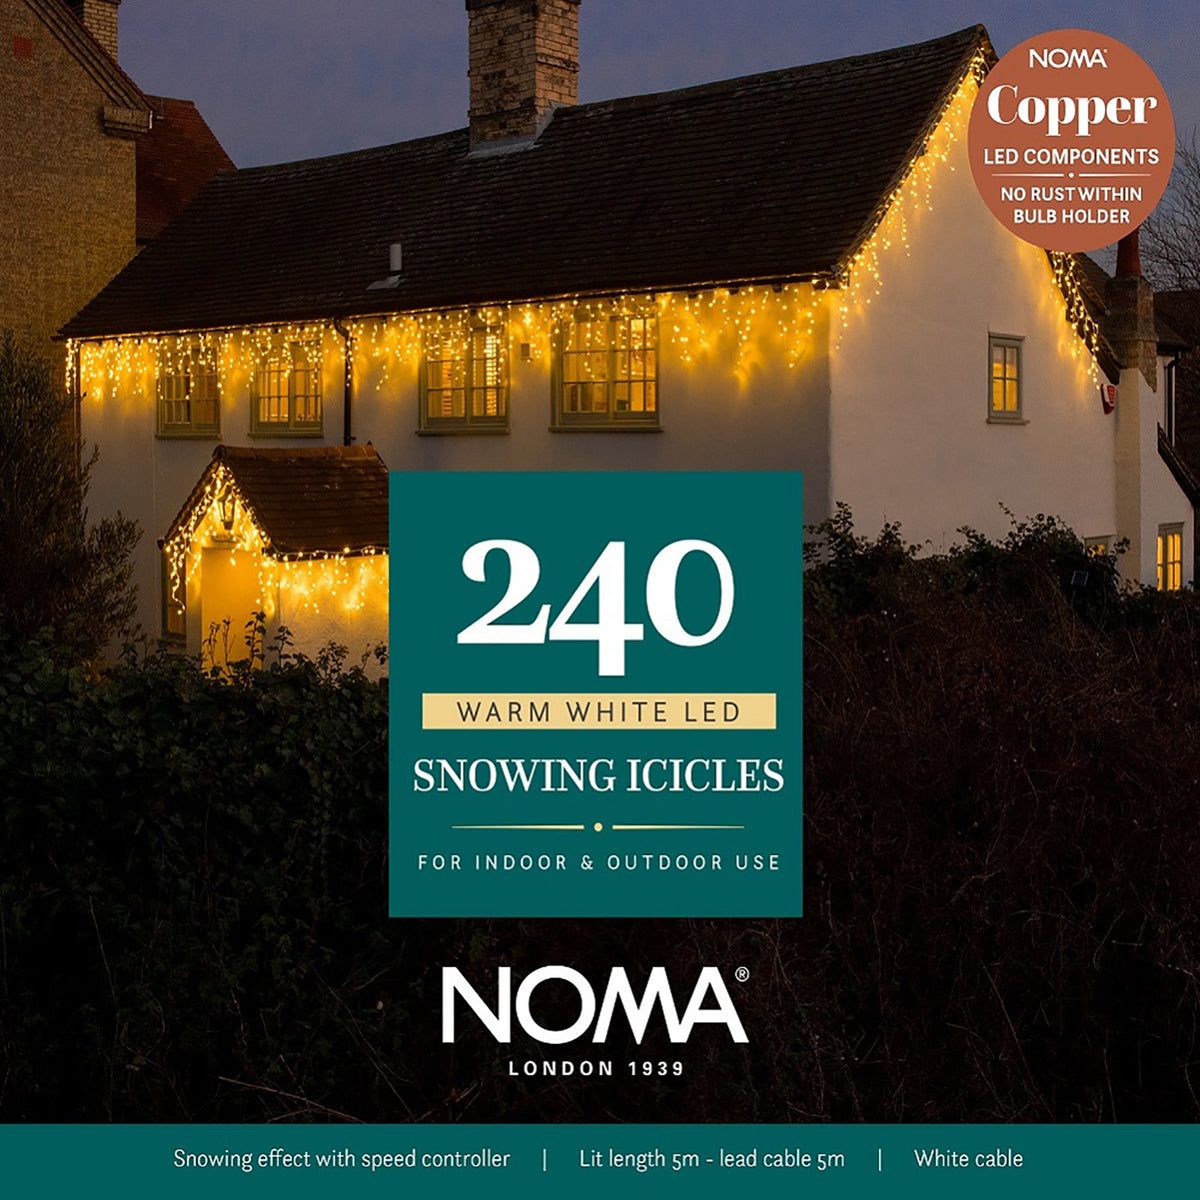 Noma Christmas 144, 240, 360, 480, 720, 960 Snowing Icicle LED Lights with White Cable - Warm White